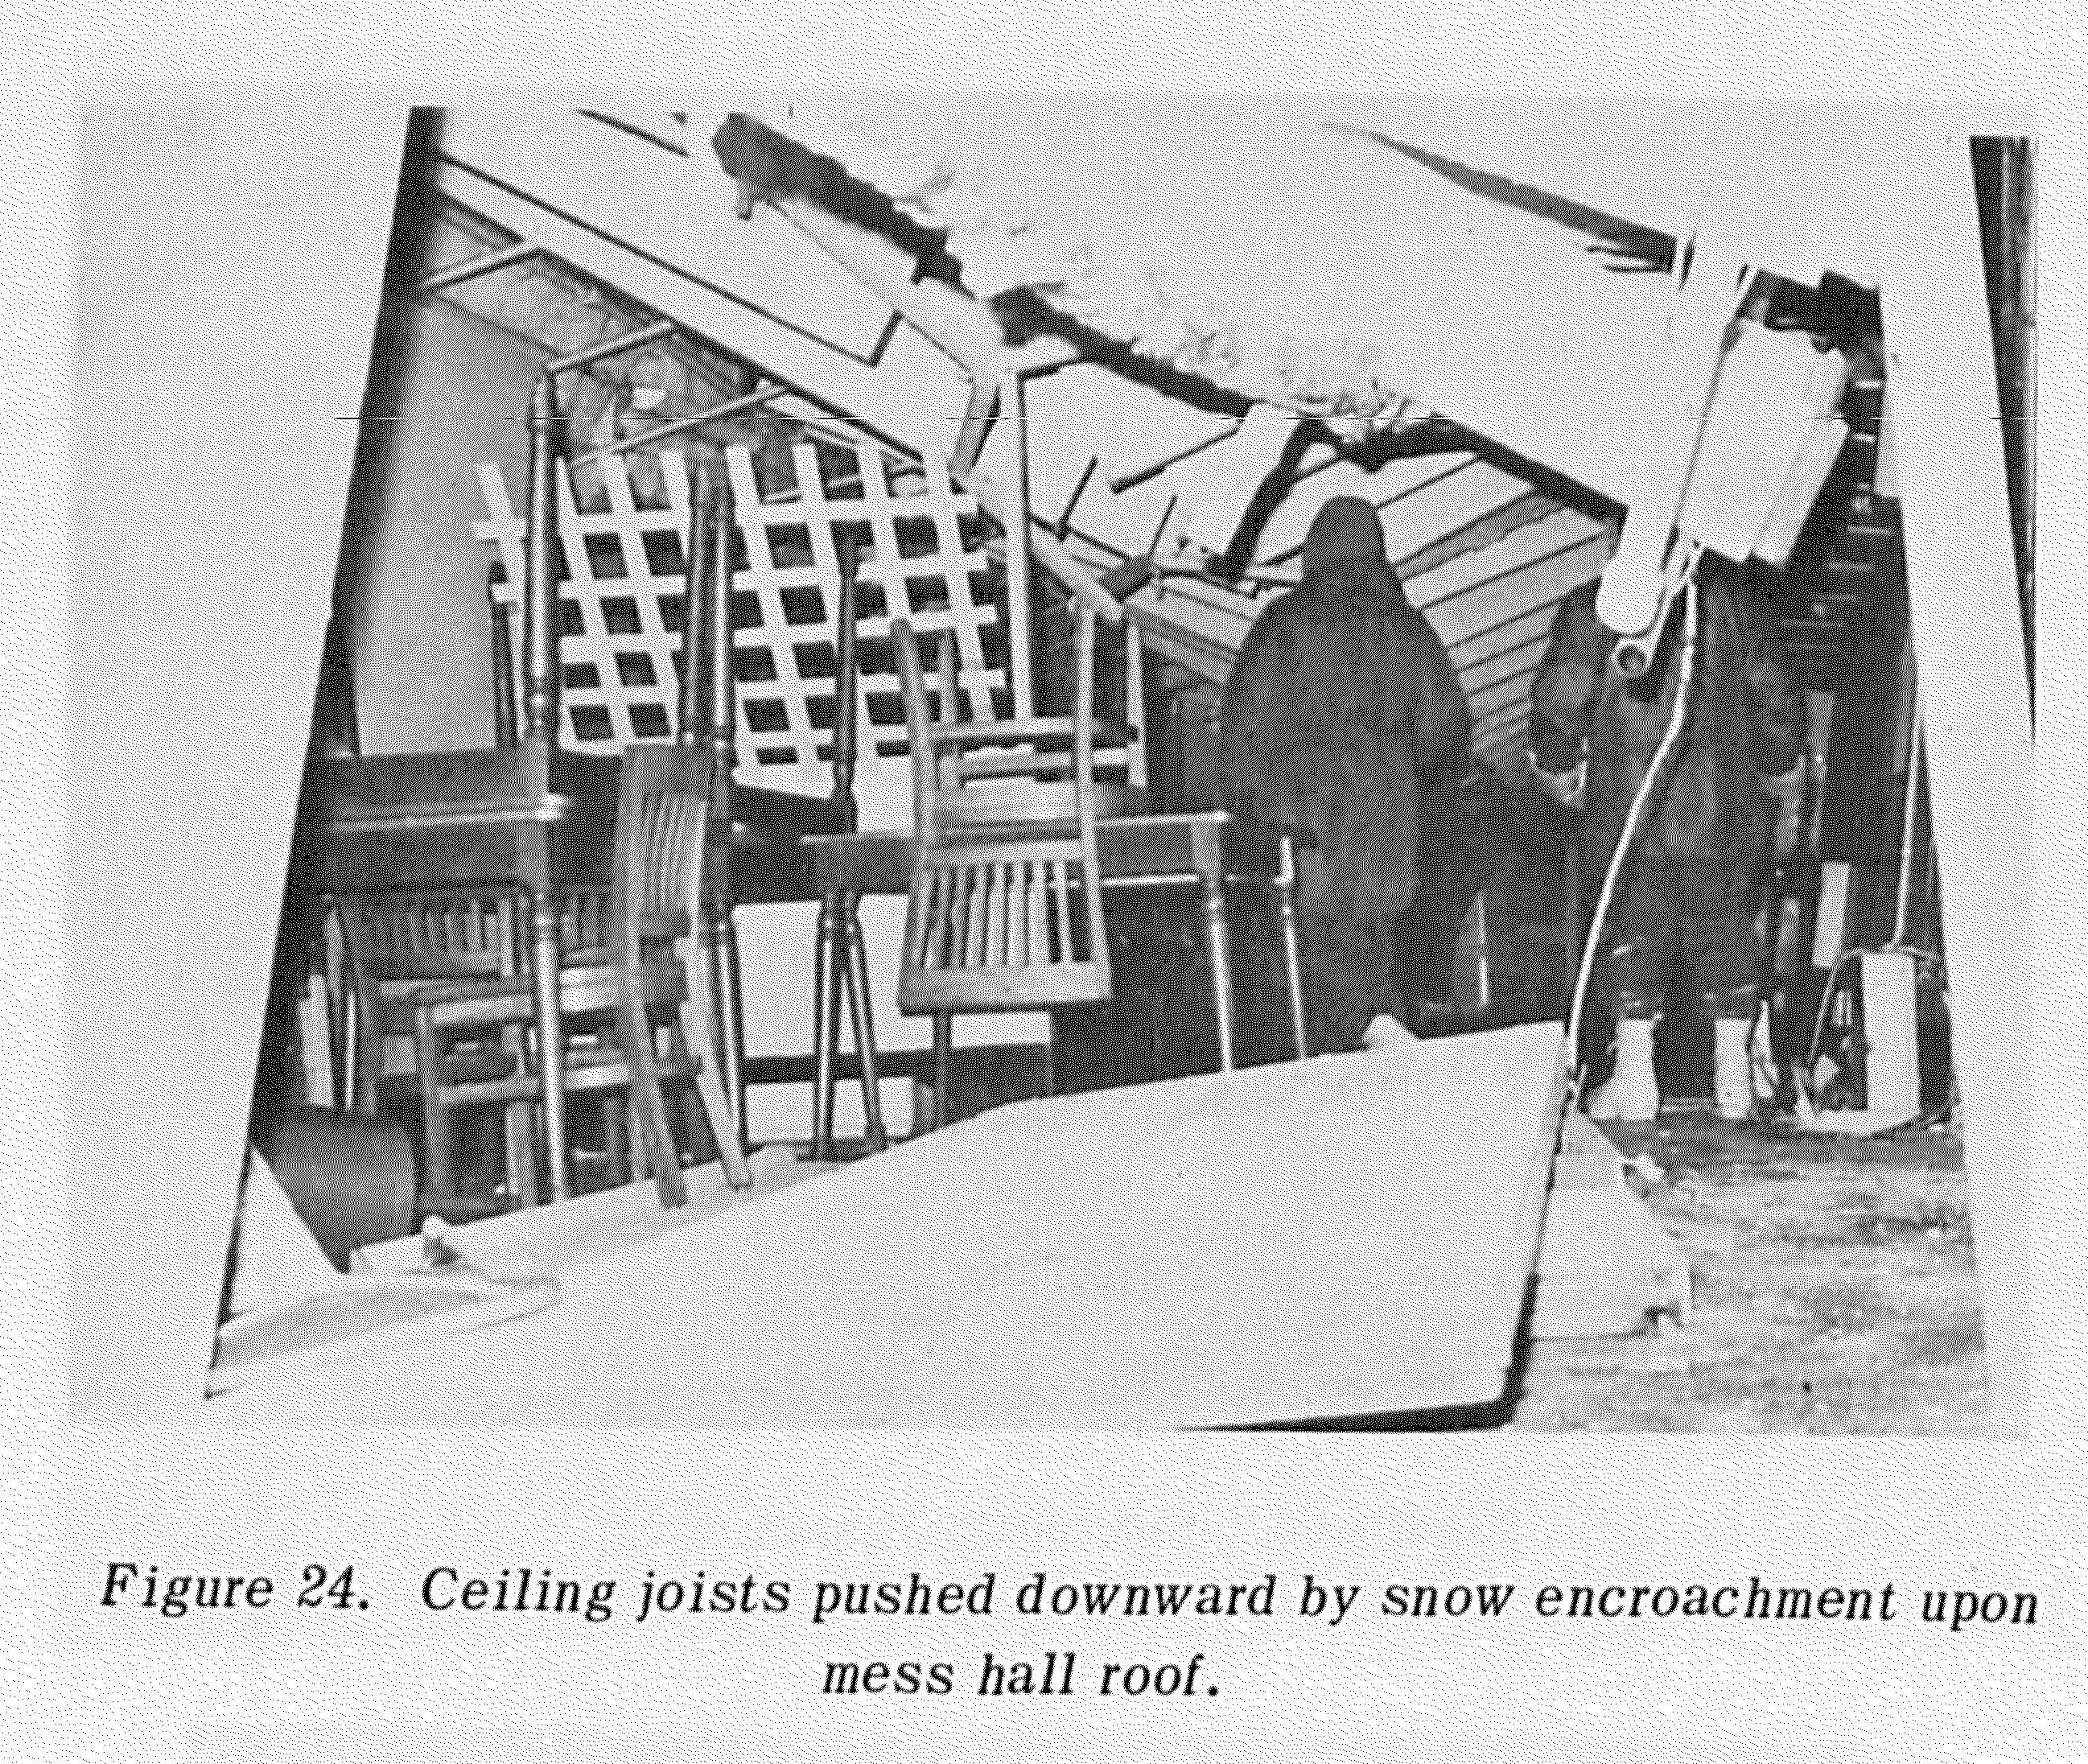 A view of Camp Century’s mess hall in 1969, after the base was abandoned, showing collapse of the ceiling joists from the weight of snow and ice.